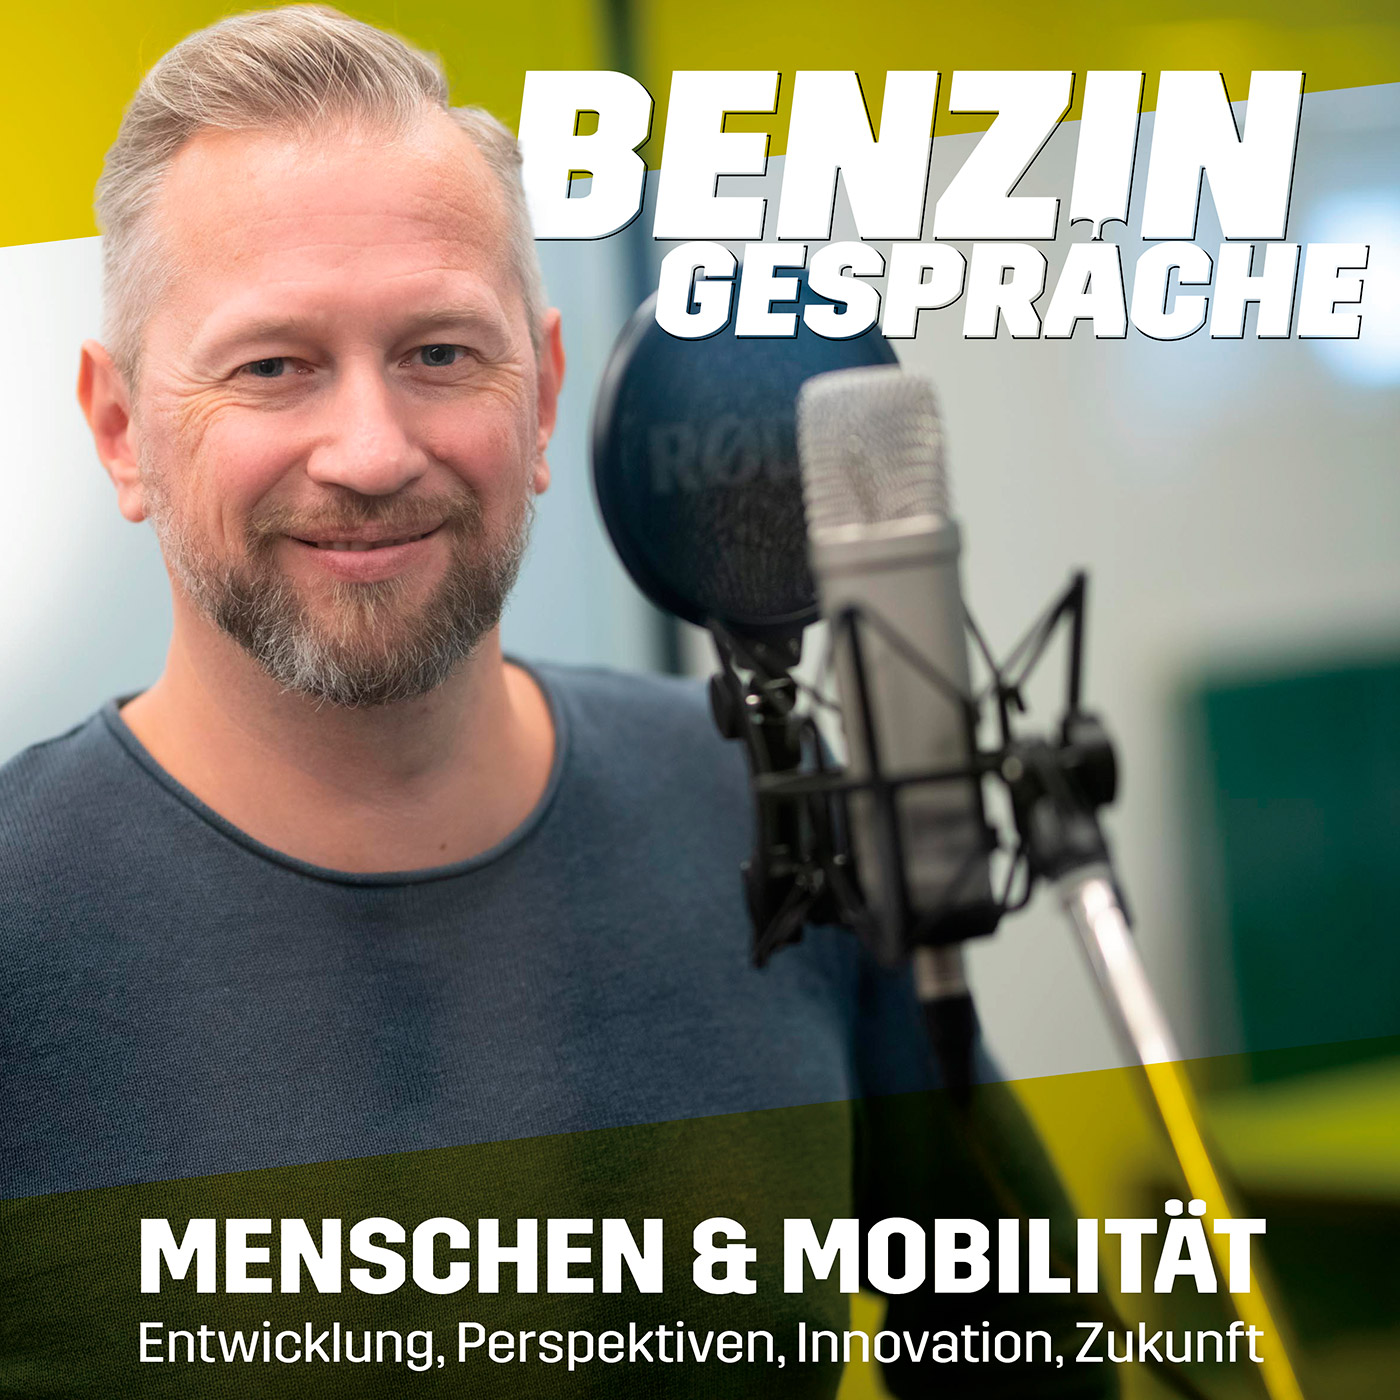 Apple Podcasts : Germany : Automotive Podcast Charts - Top - Chartable